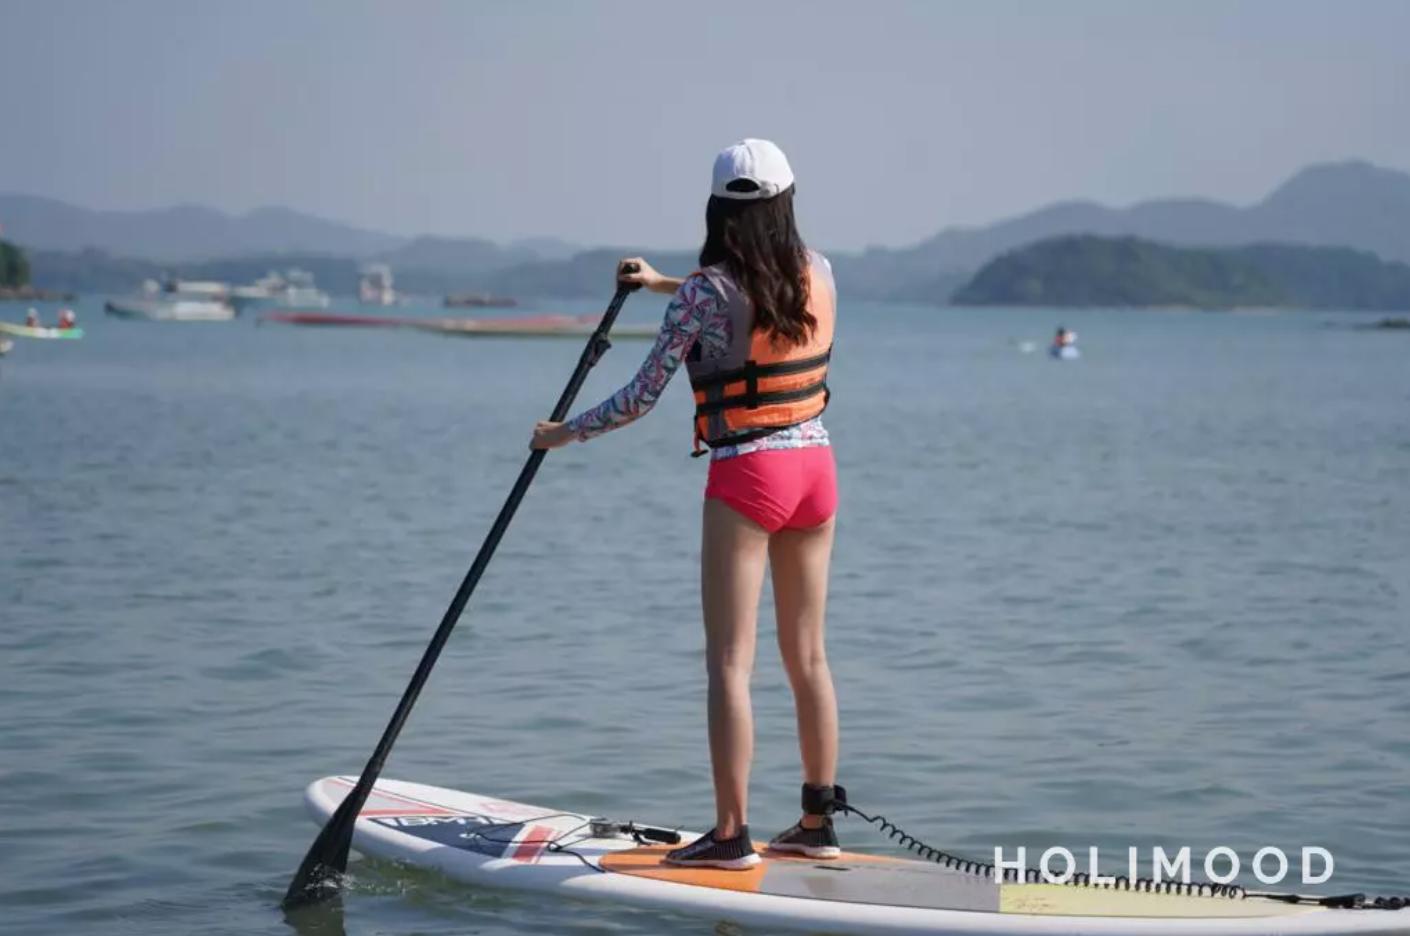 【Sai Kung】SUP Board Experience with Guidance - Charter (min. 8 pax)